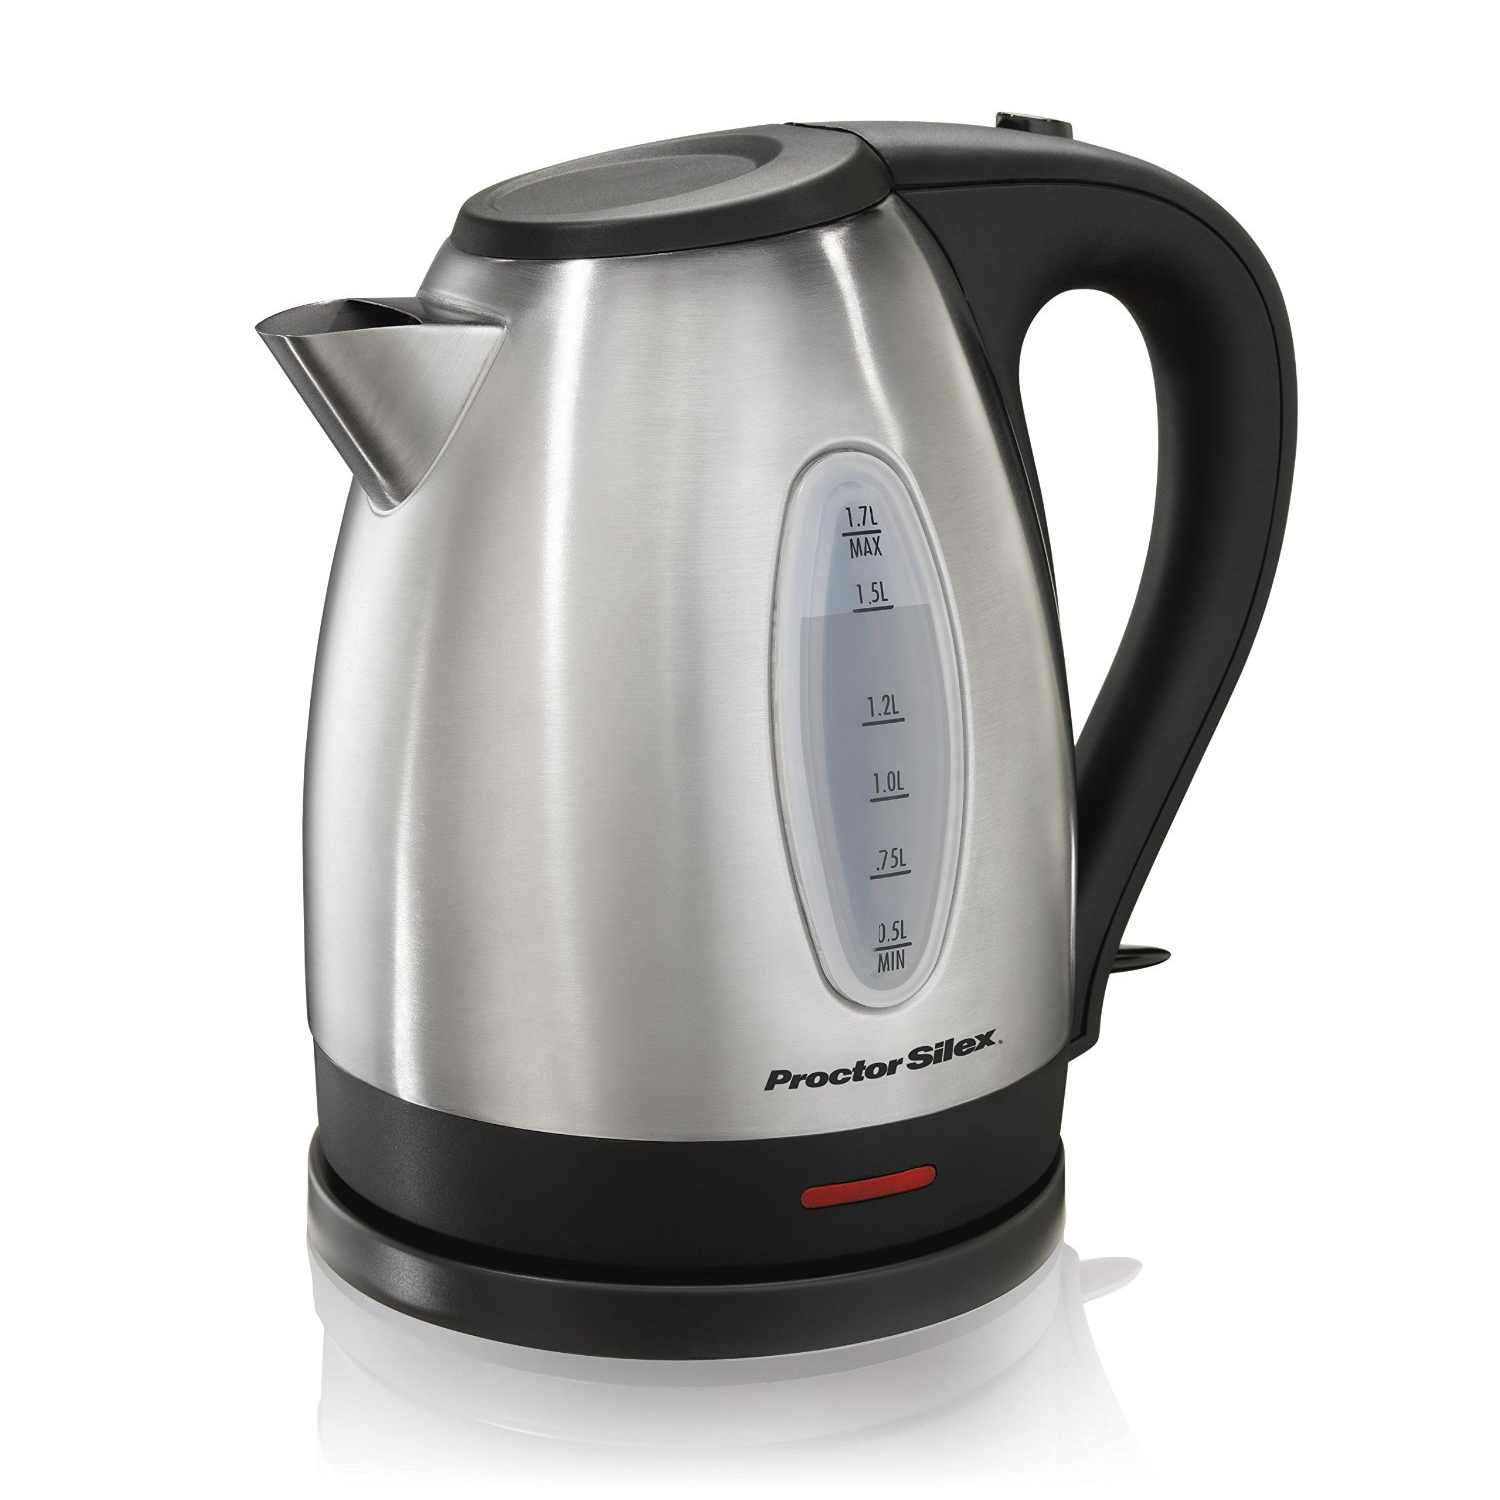 Proctor Silex Stainless Steel Electric Kettle Only $29.99!